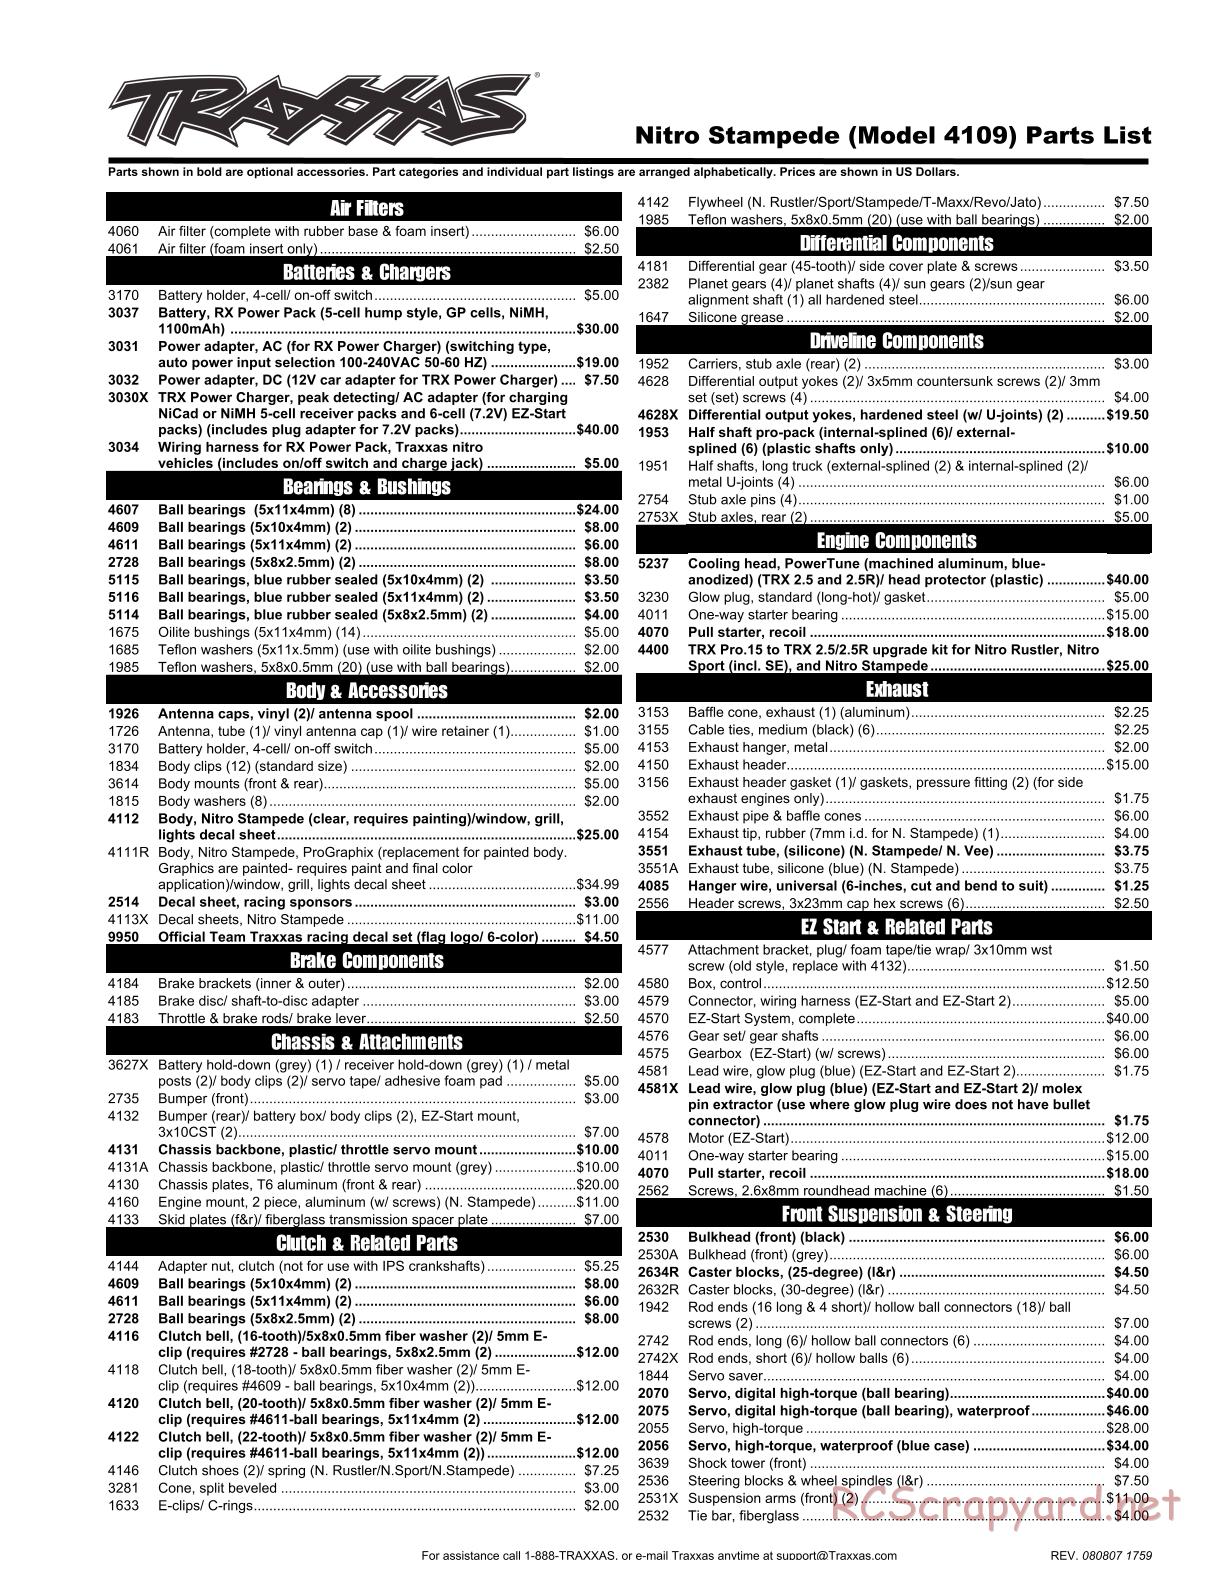 Traxxas - Nitro Stampede (2007) - Parts List - Page 1